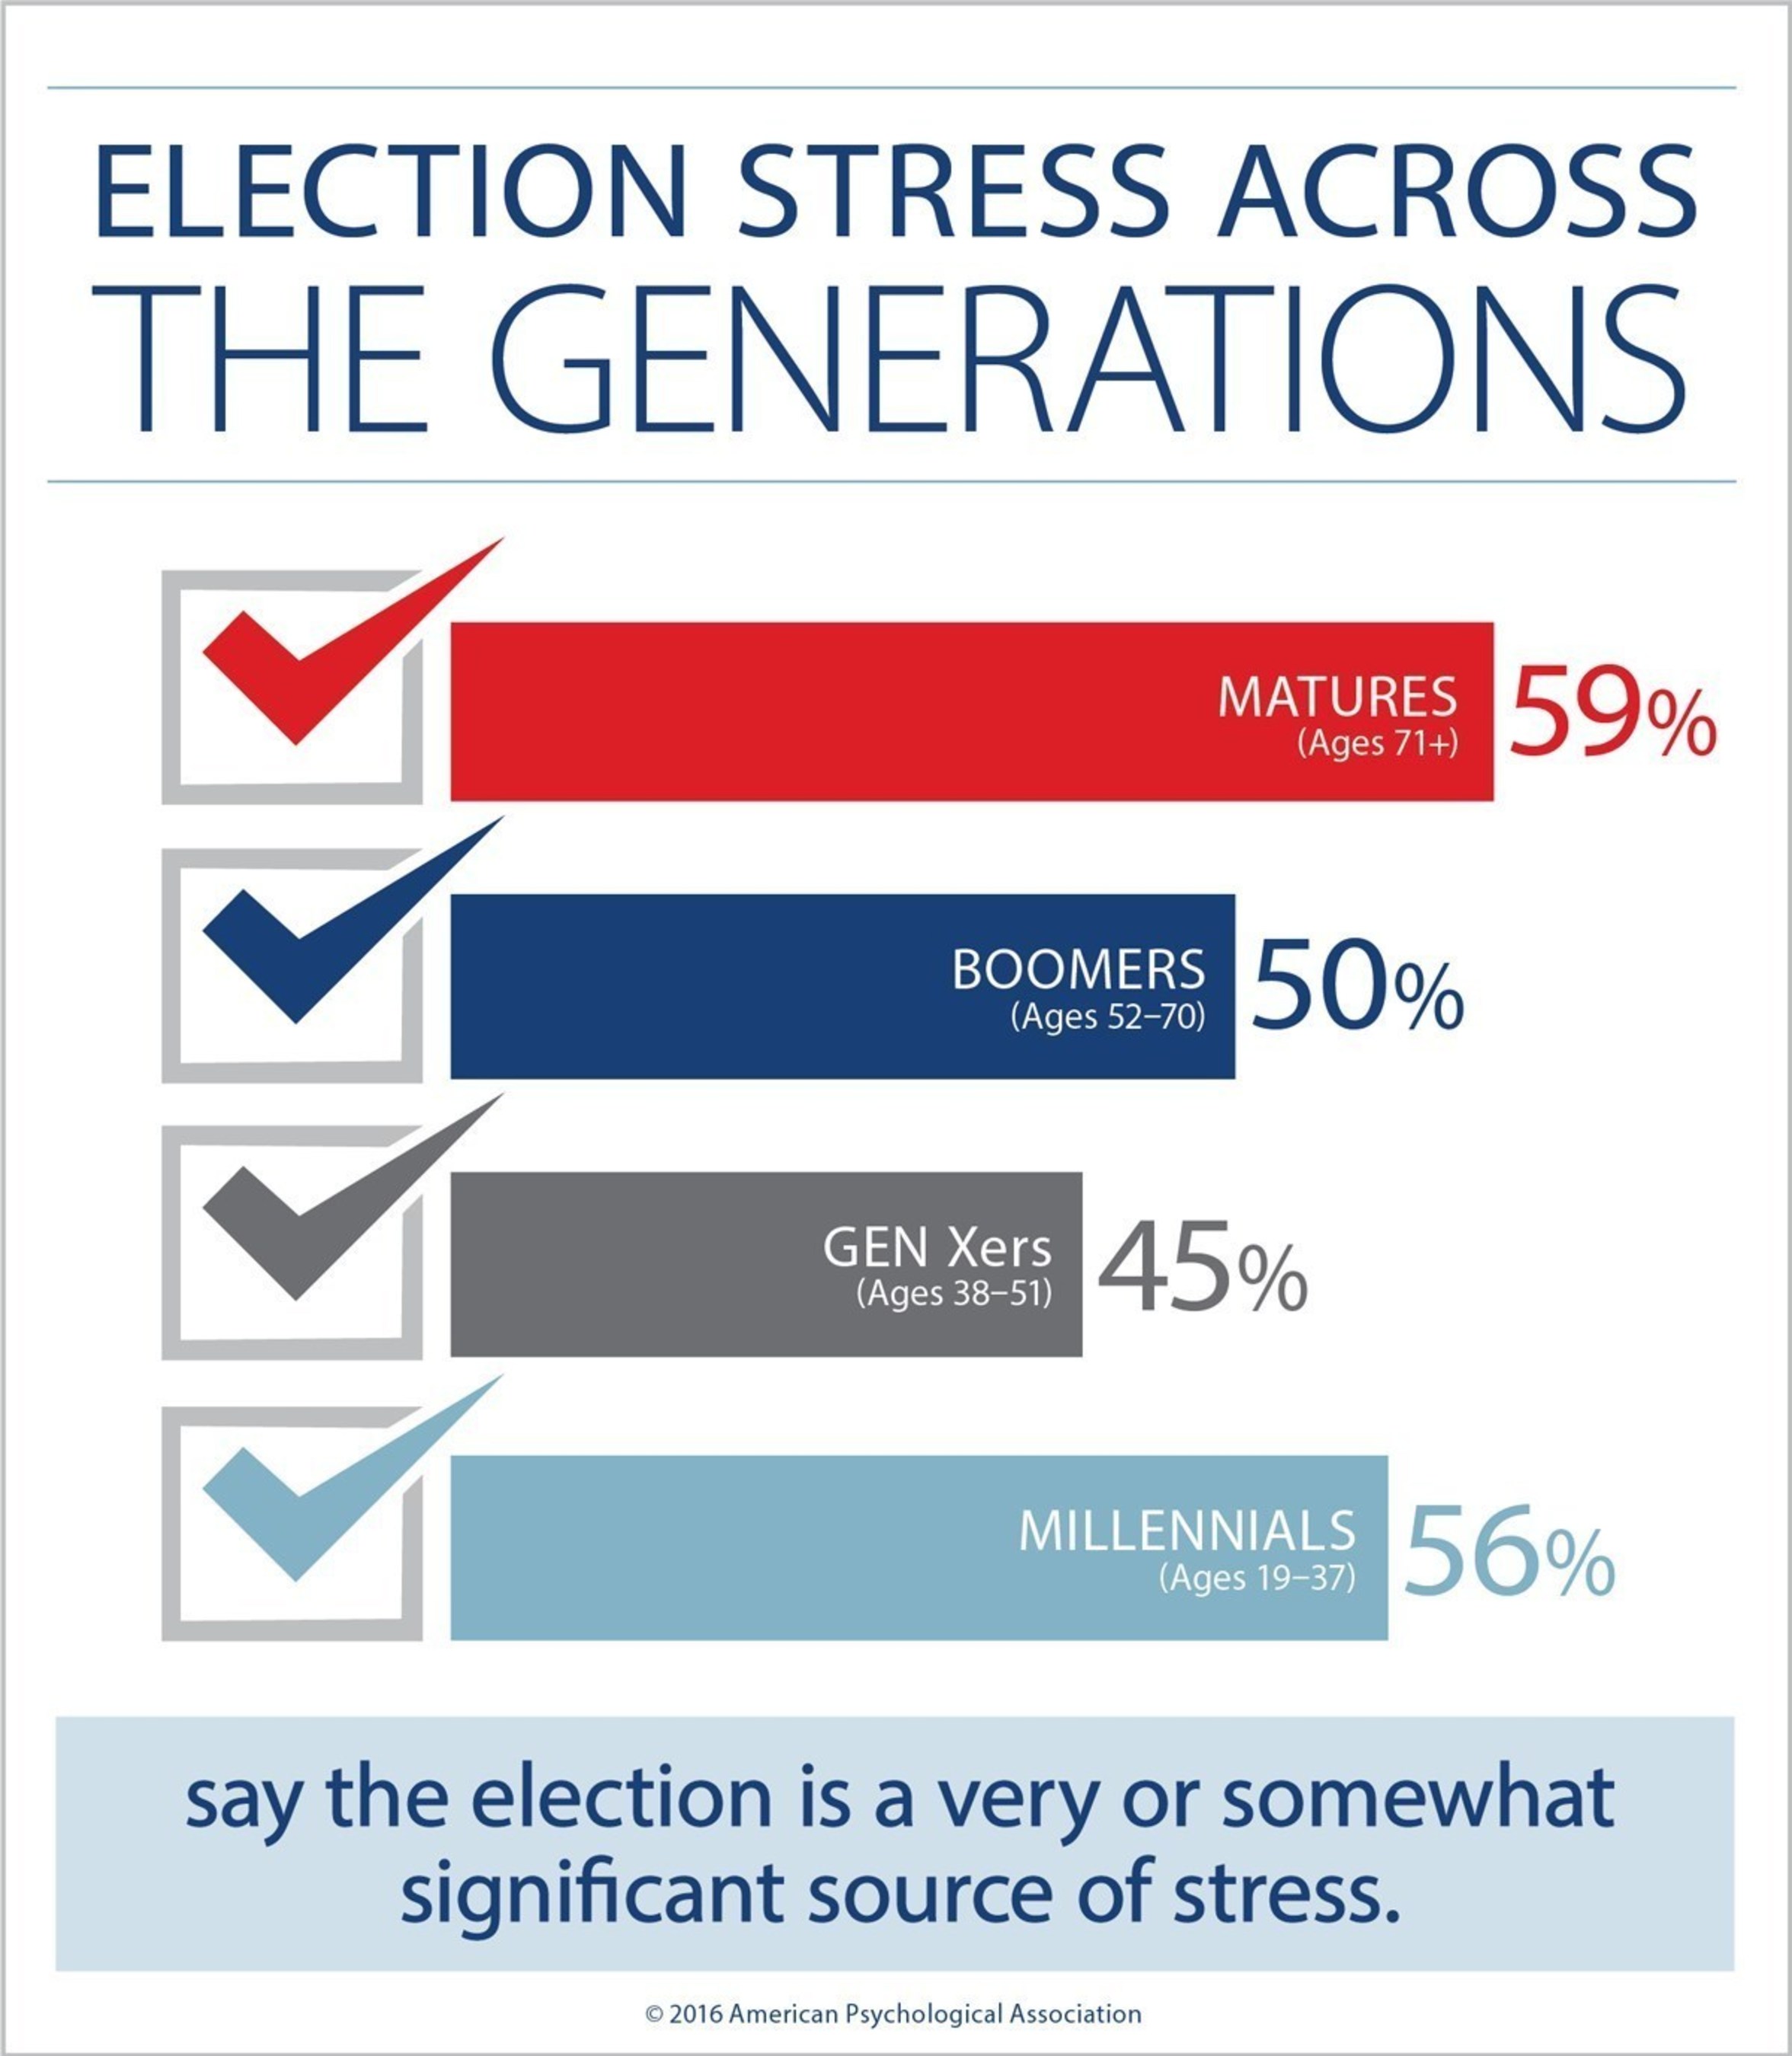 A majority of Americans say that they are stressed about the upcoming presidential election, but more older adults and millennials say the presidential election is a source of stress than Gen Xers and boomers.